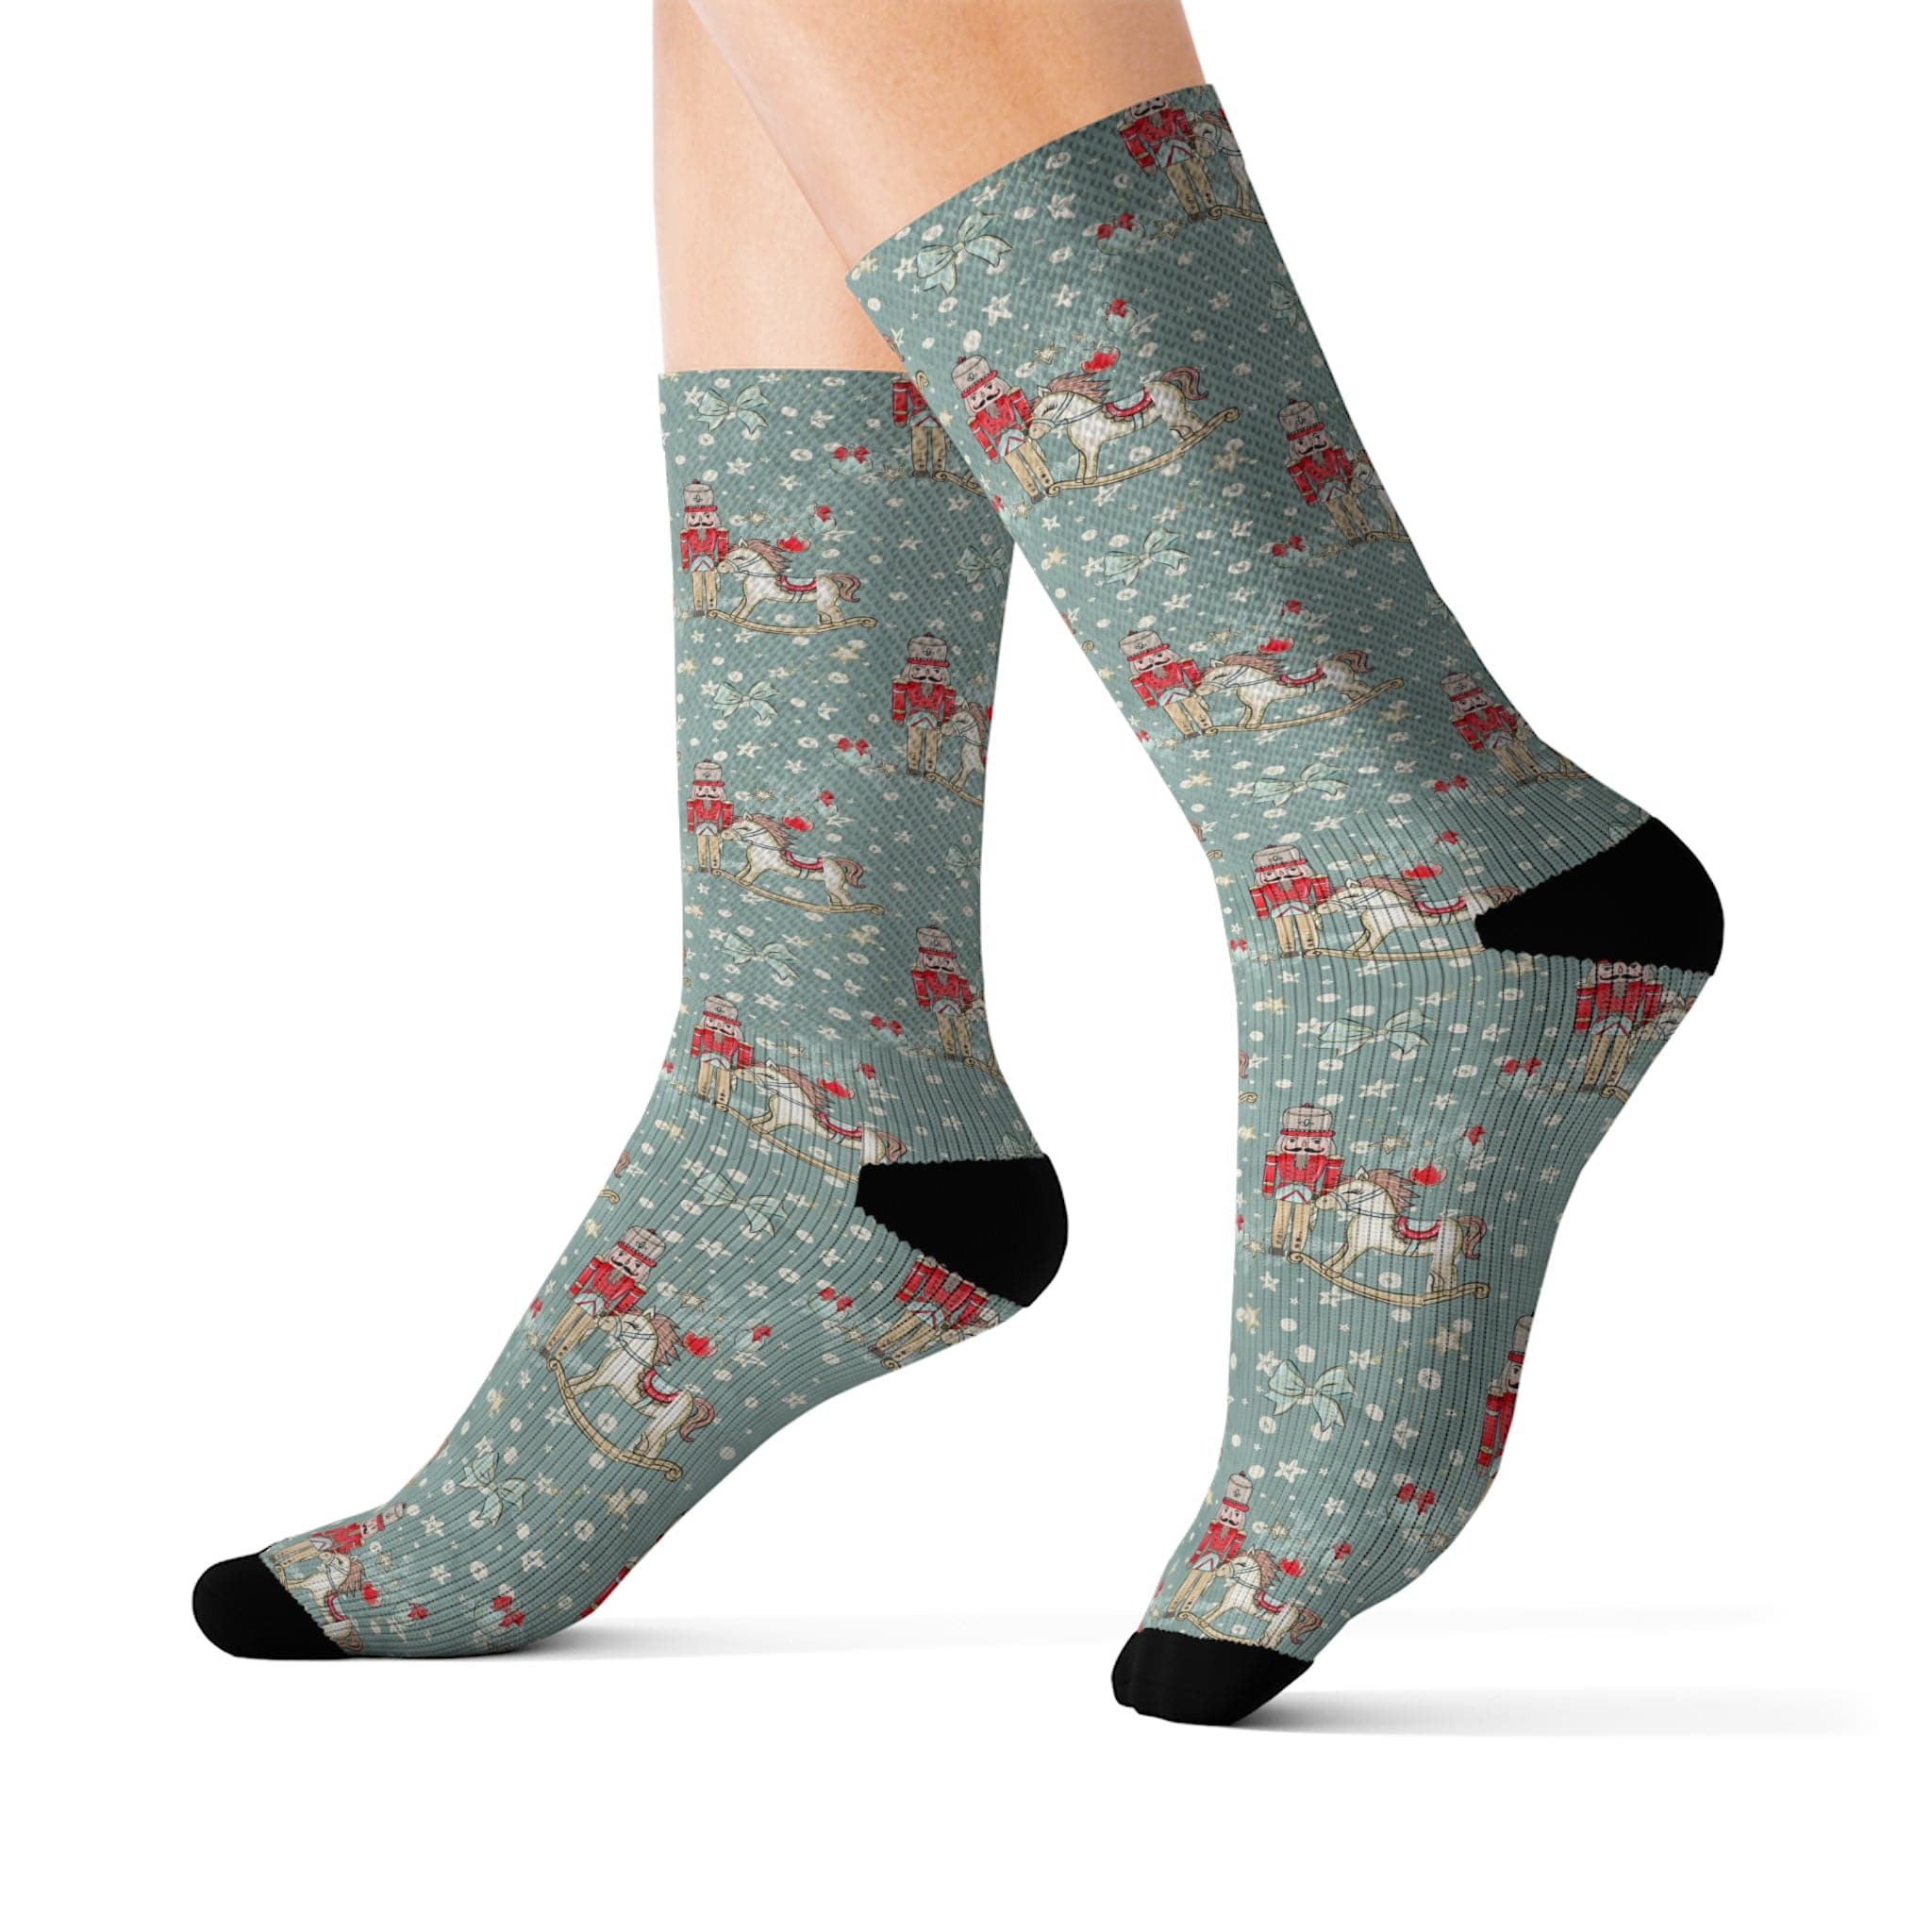 Printify Festive Nutcracker Christmas Socks: Cozy Crew Length with Fleece Lining - Perfect for Men and Women, Holiday Gifts, Stocking Stuffers All Over Prints M 14461856421070495008